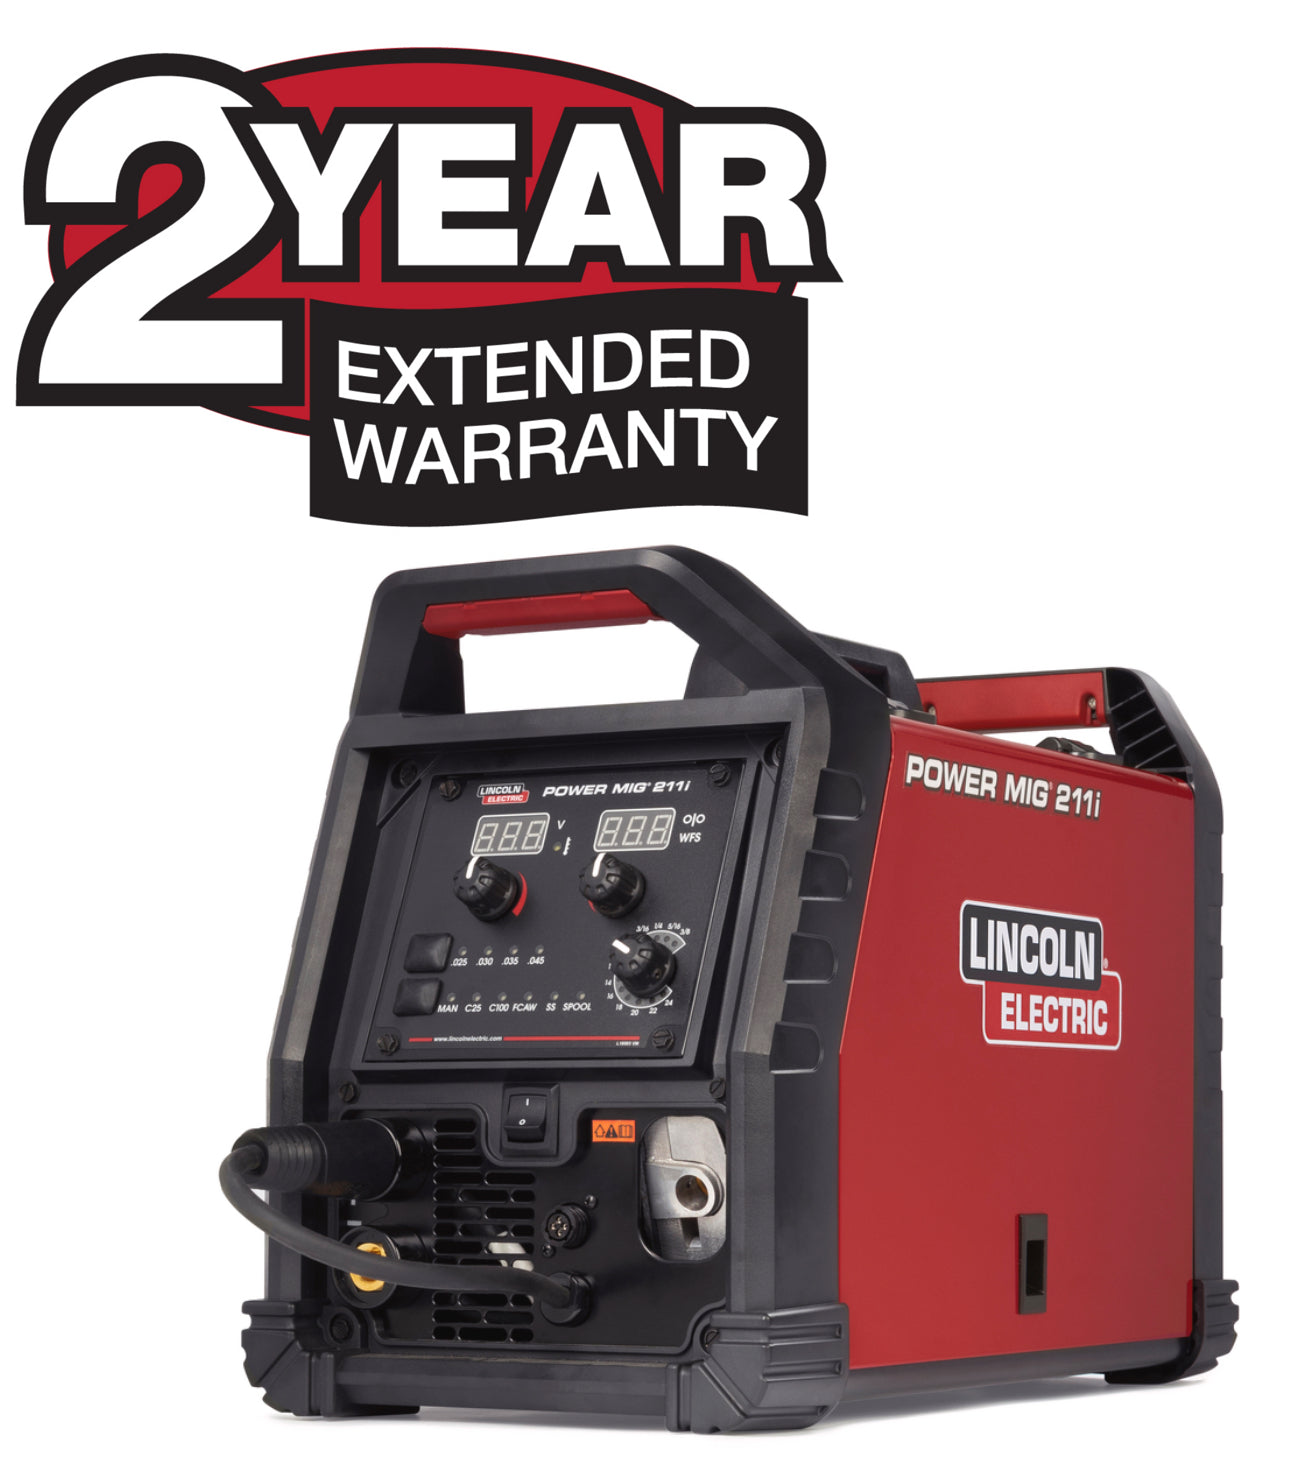 Lincoln 2-Year Extended Warranty - POWER MIG 211i X6080